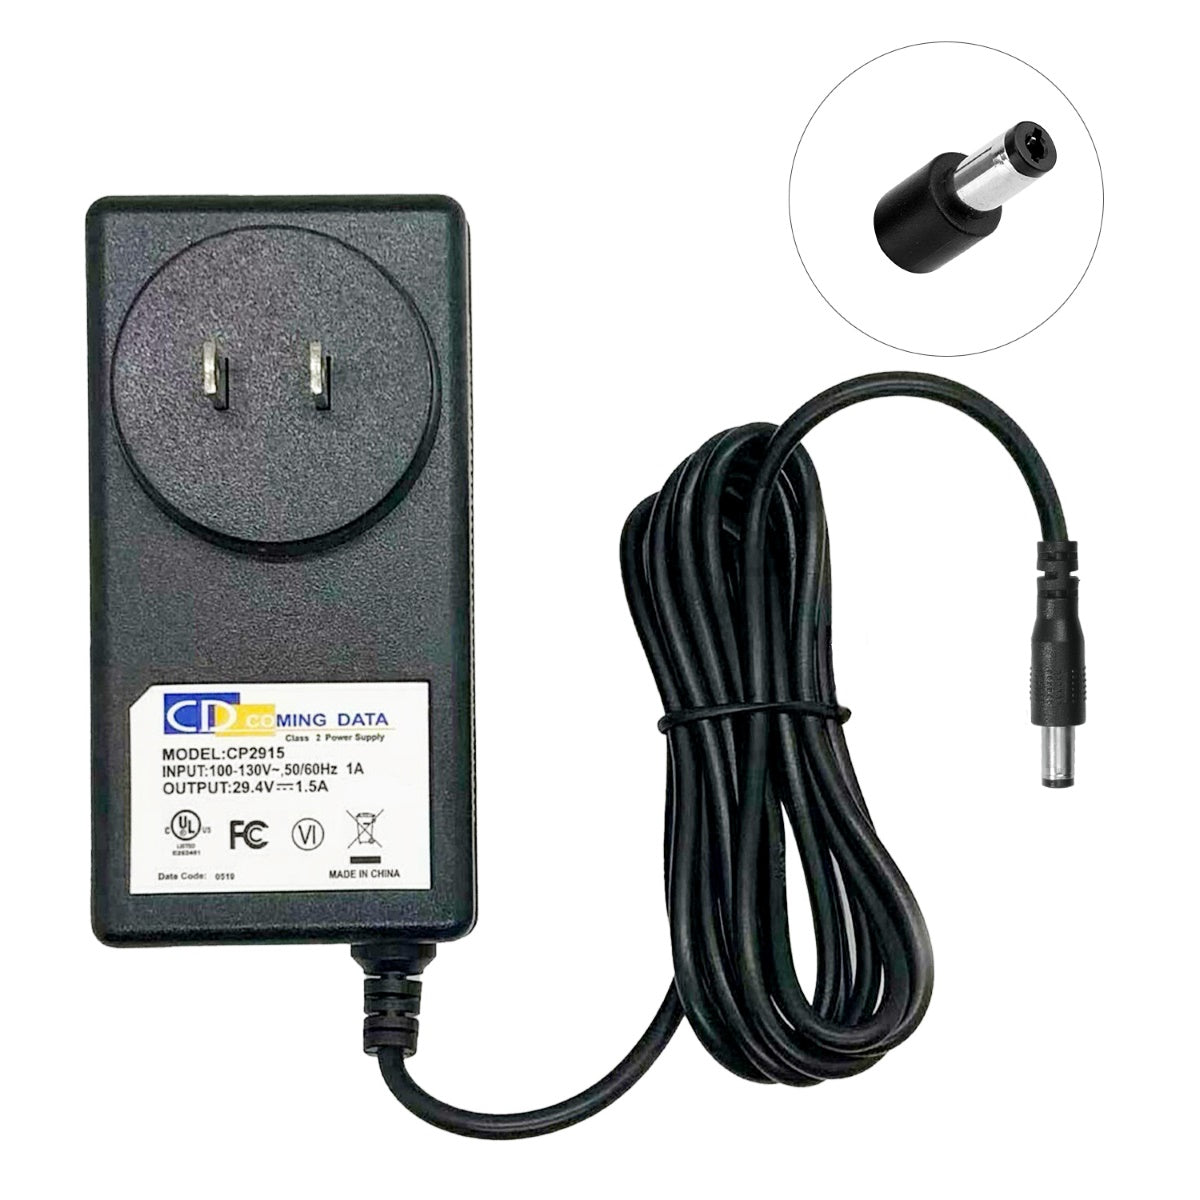 Charger for Pulse Super-B Series Scooter